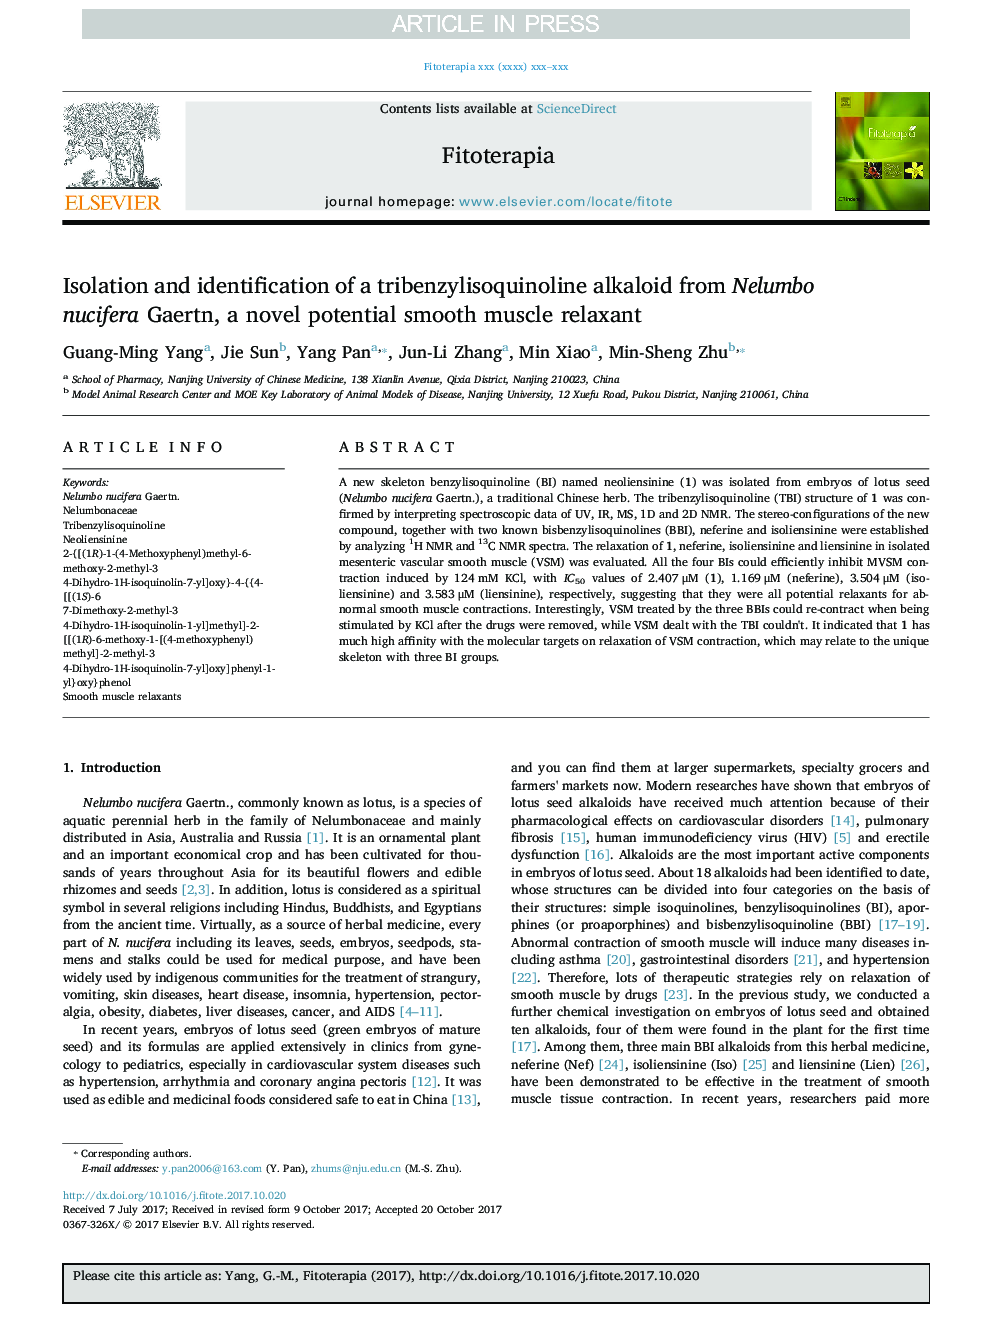 Isolation and identification of a tribenzylisoquinoline alkaloid from Nelumbo nucifera Gaertn, a novel potential smooth muscle relaxant